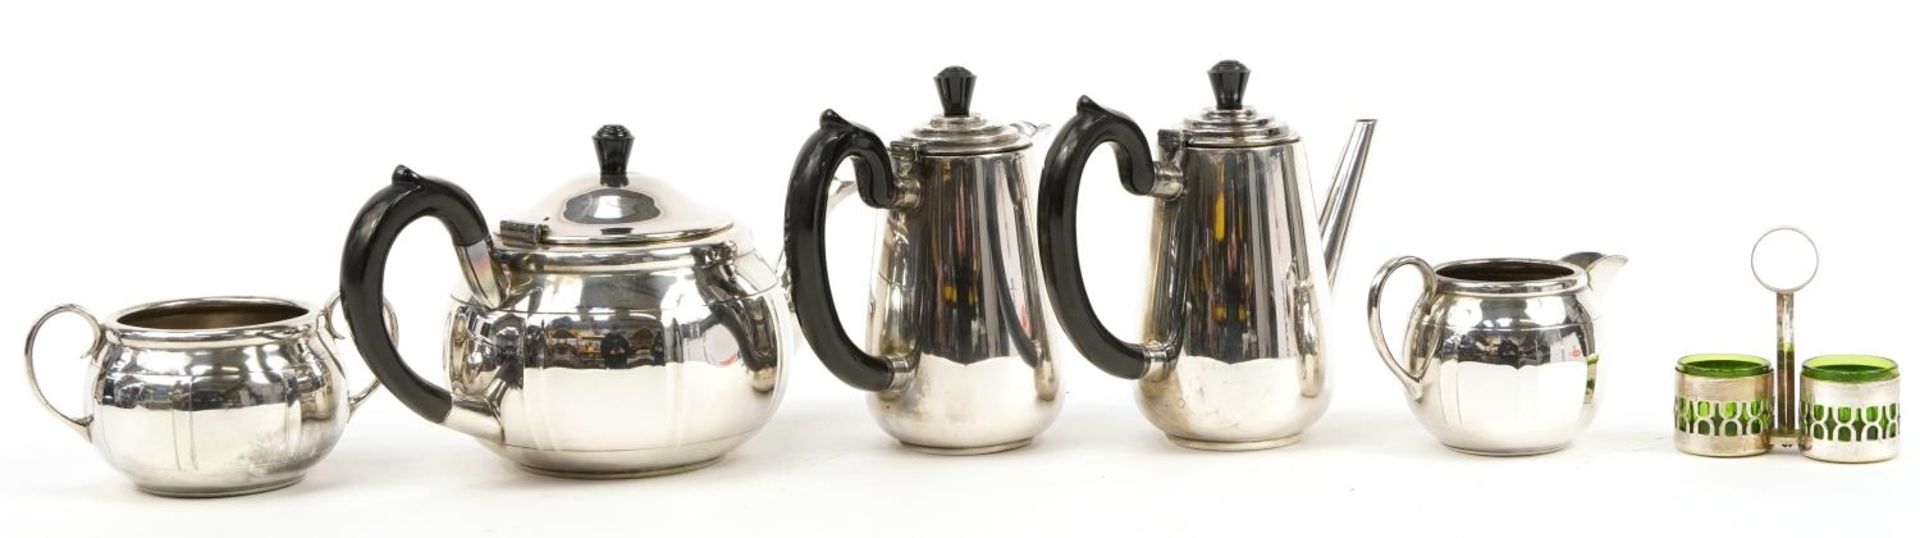 Silver plated items including a Modernist three piece tea set and matching water pot and coffee - Image 9 of 11